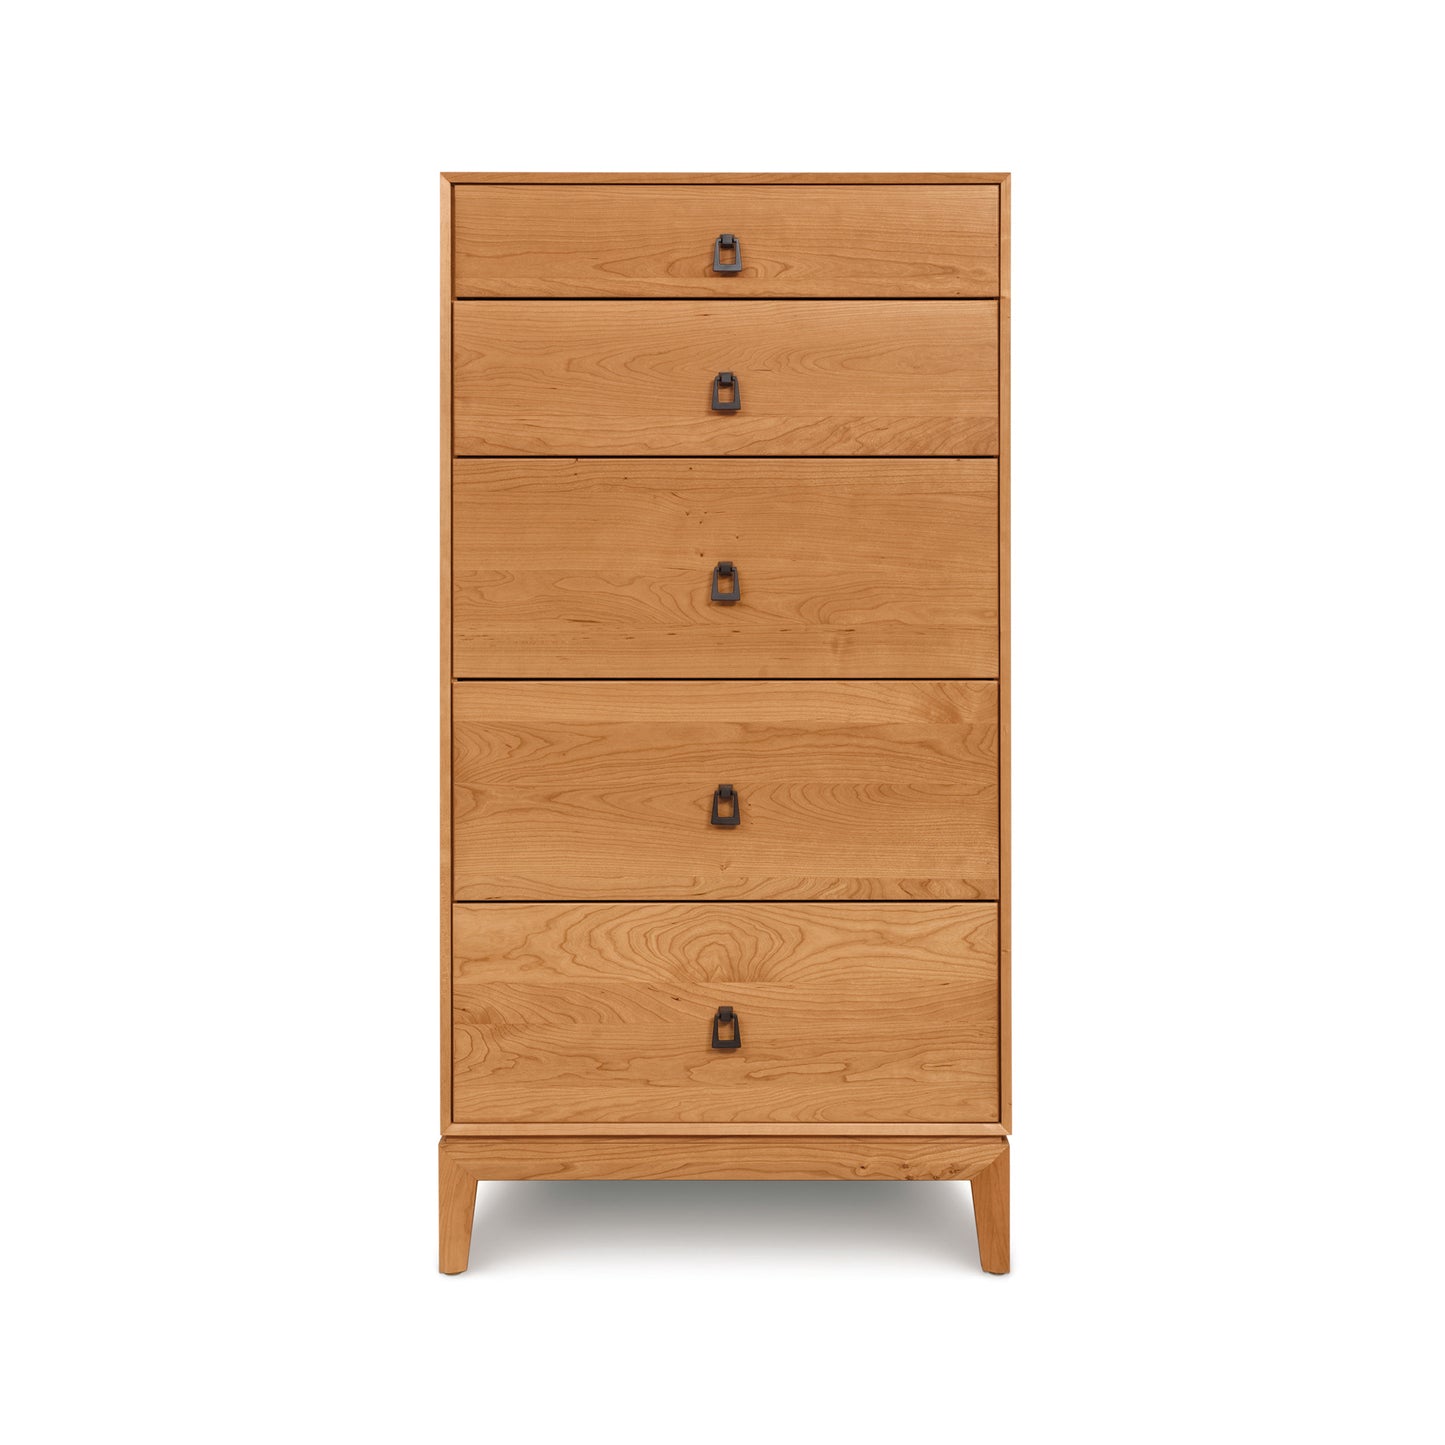 A solid natural wood Copeland Furniture Mansfield 5-Drawer Narrow Chest with simple handles, standing against a white background.